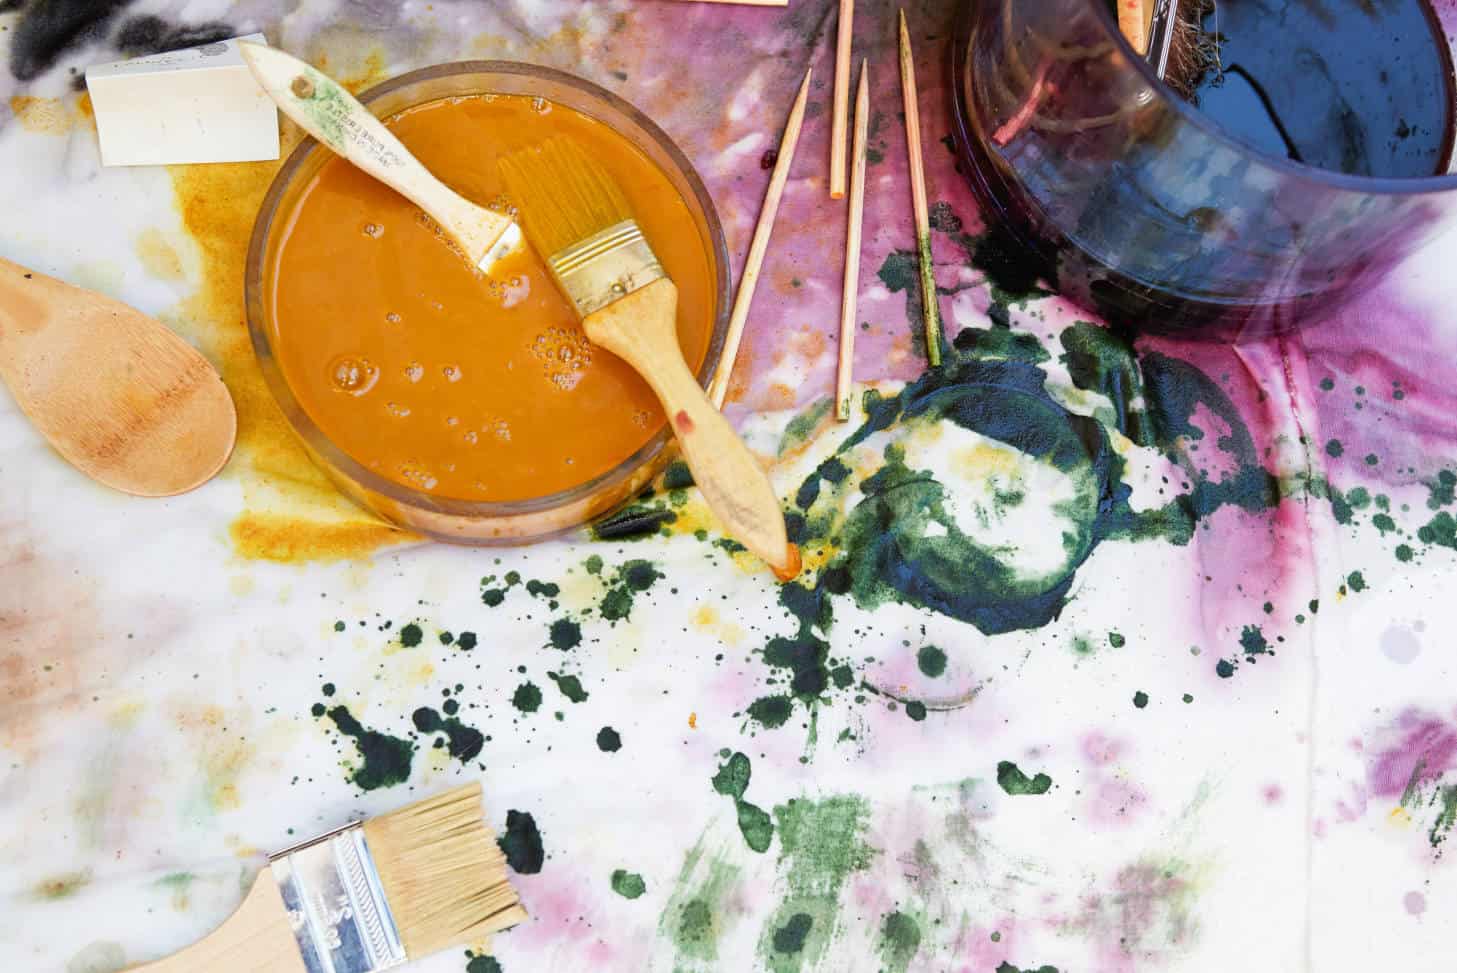 dyeing fabric with food coloring